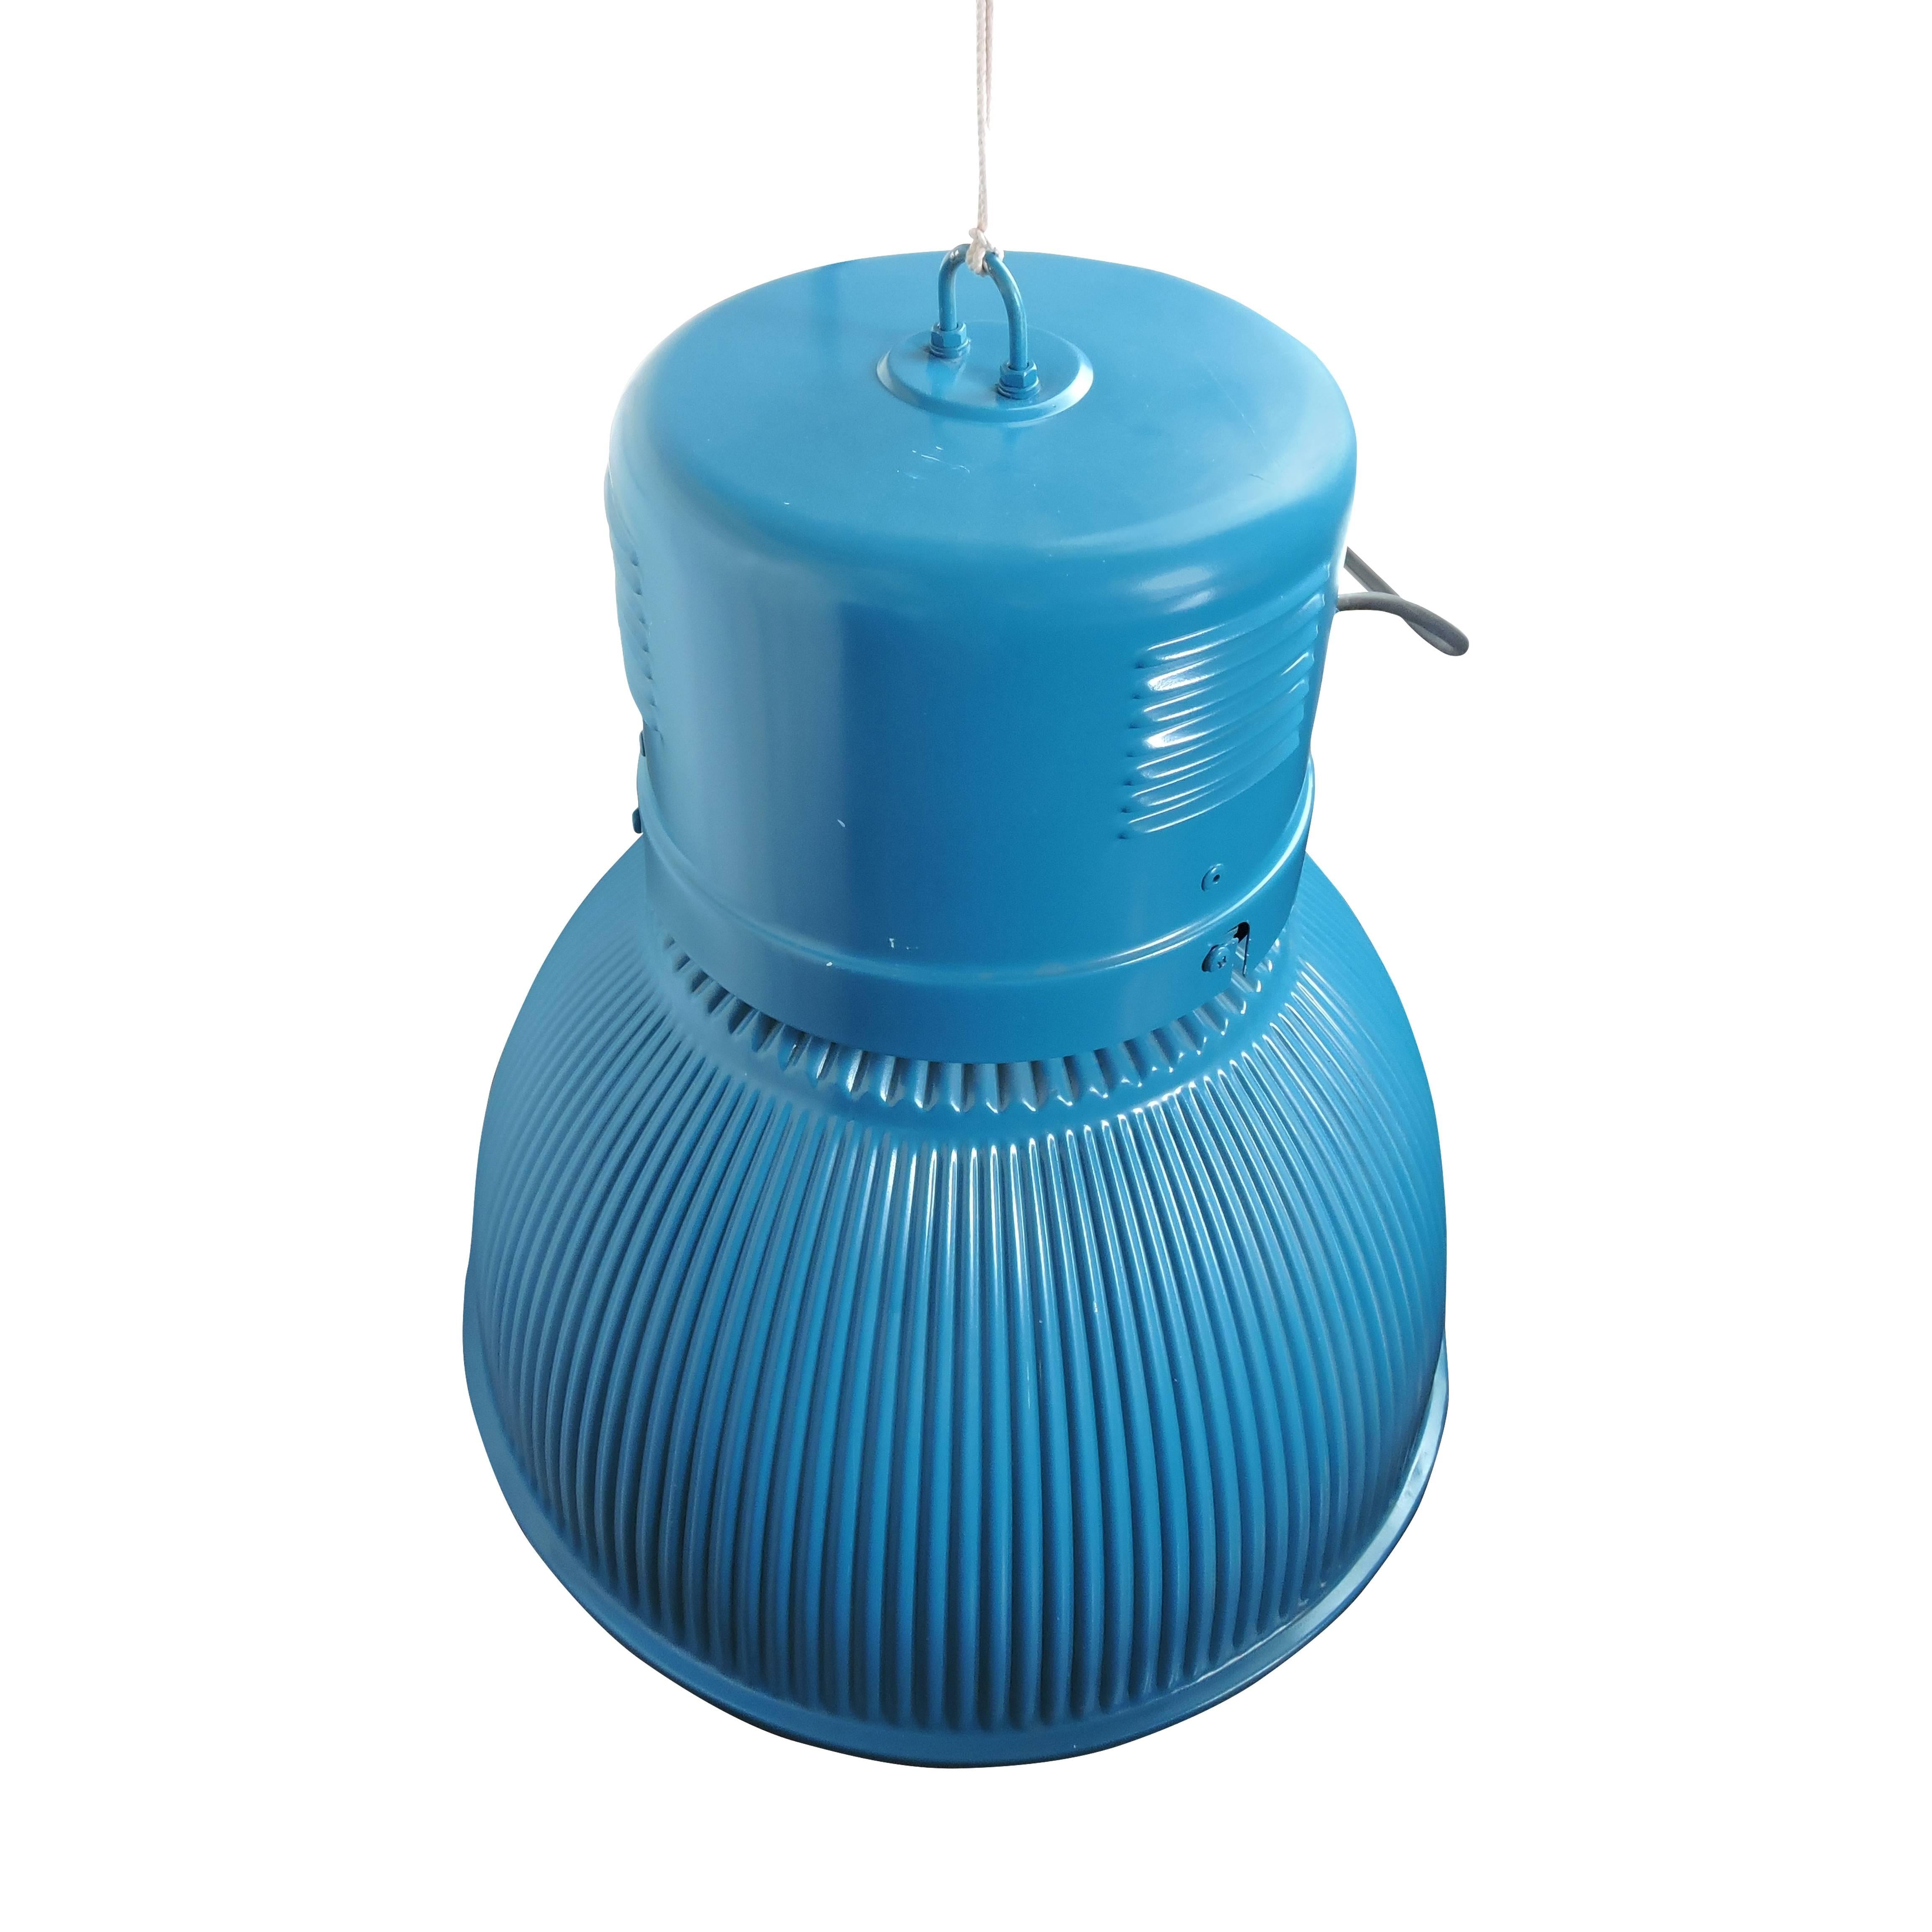 This roundish shaped hall lighting is thought to have originated from a factory's hanger. The light has a blue ribbed effect.